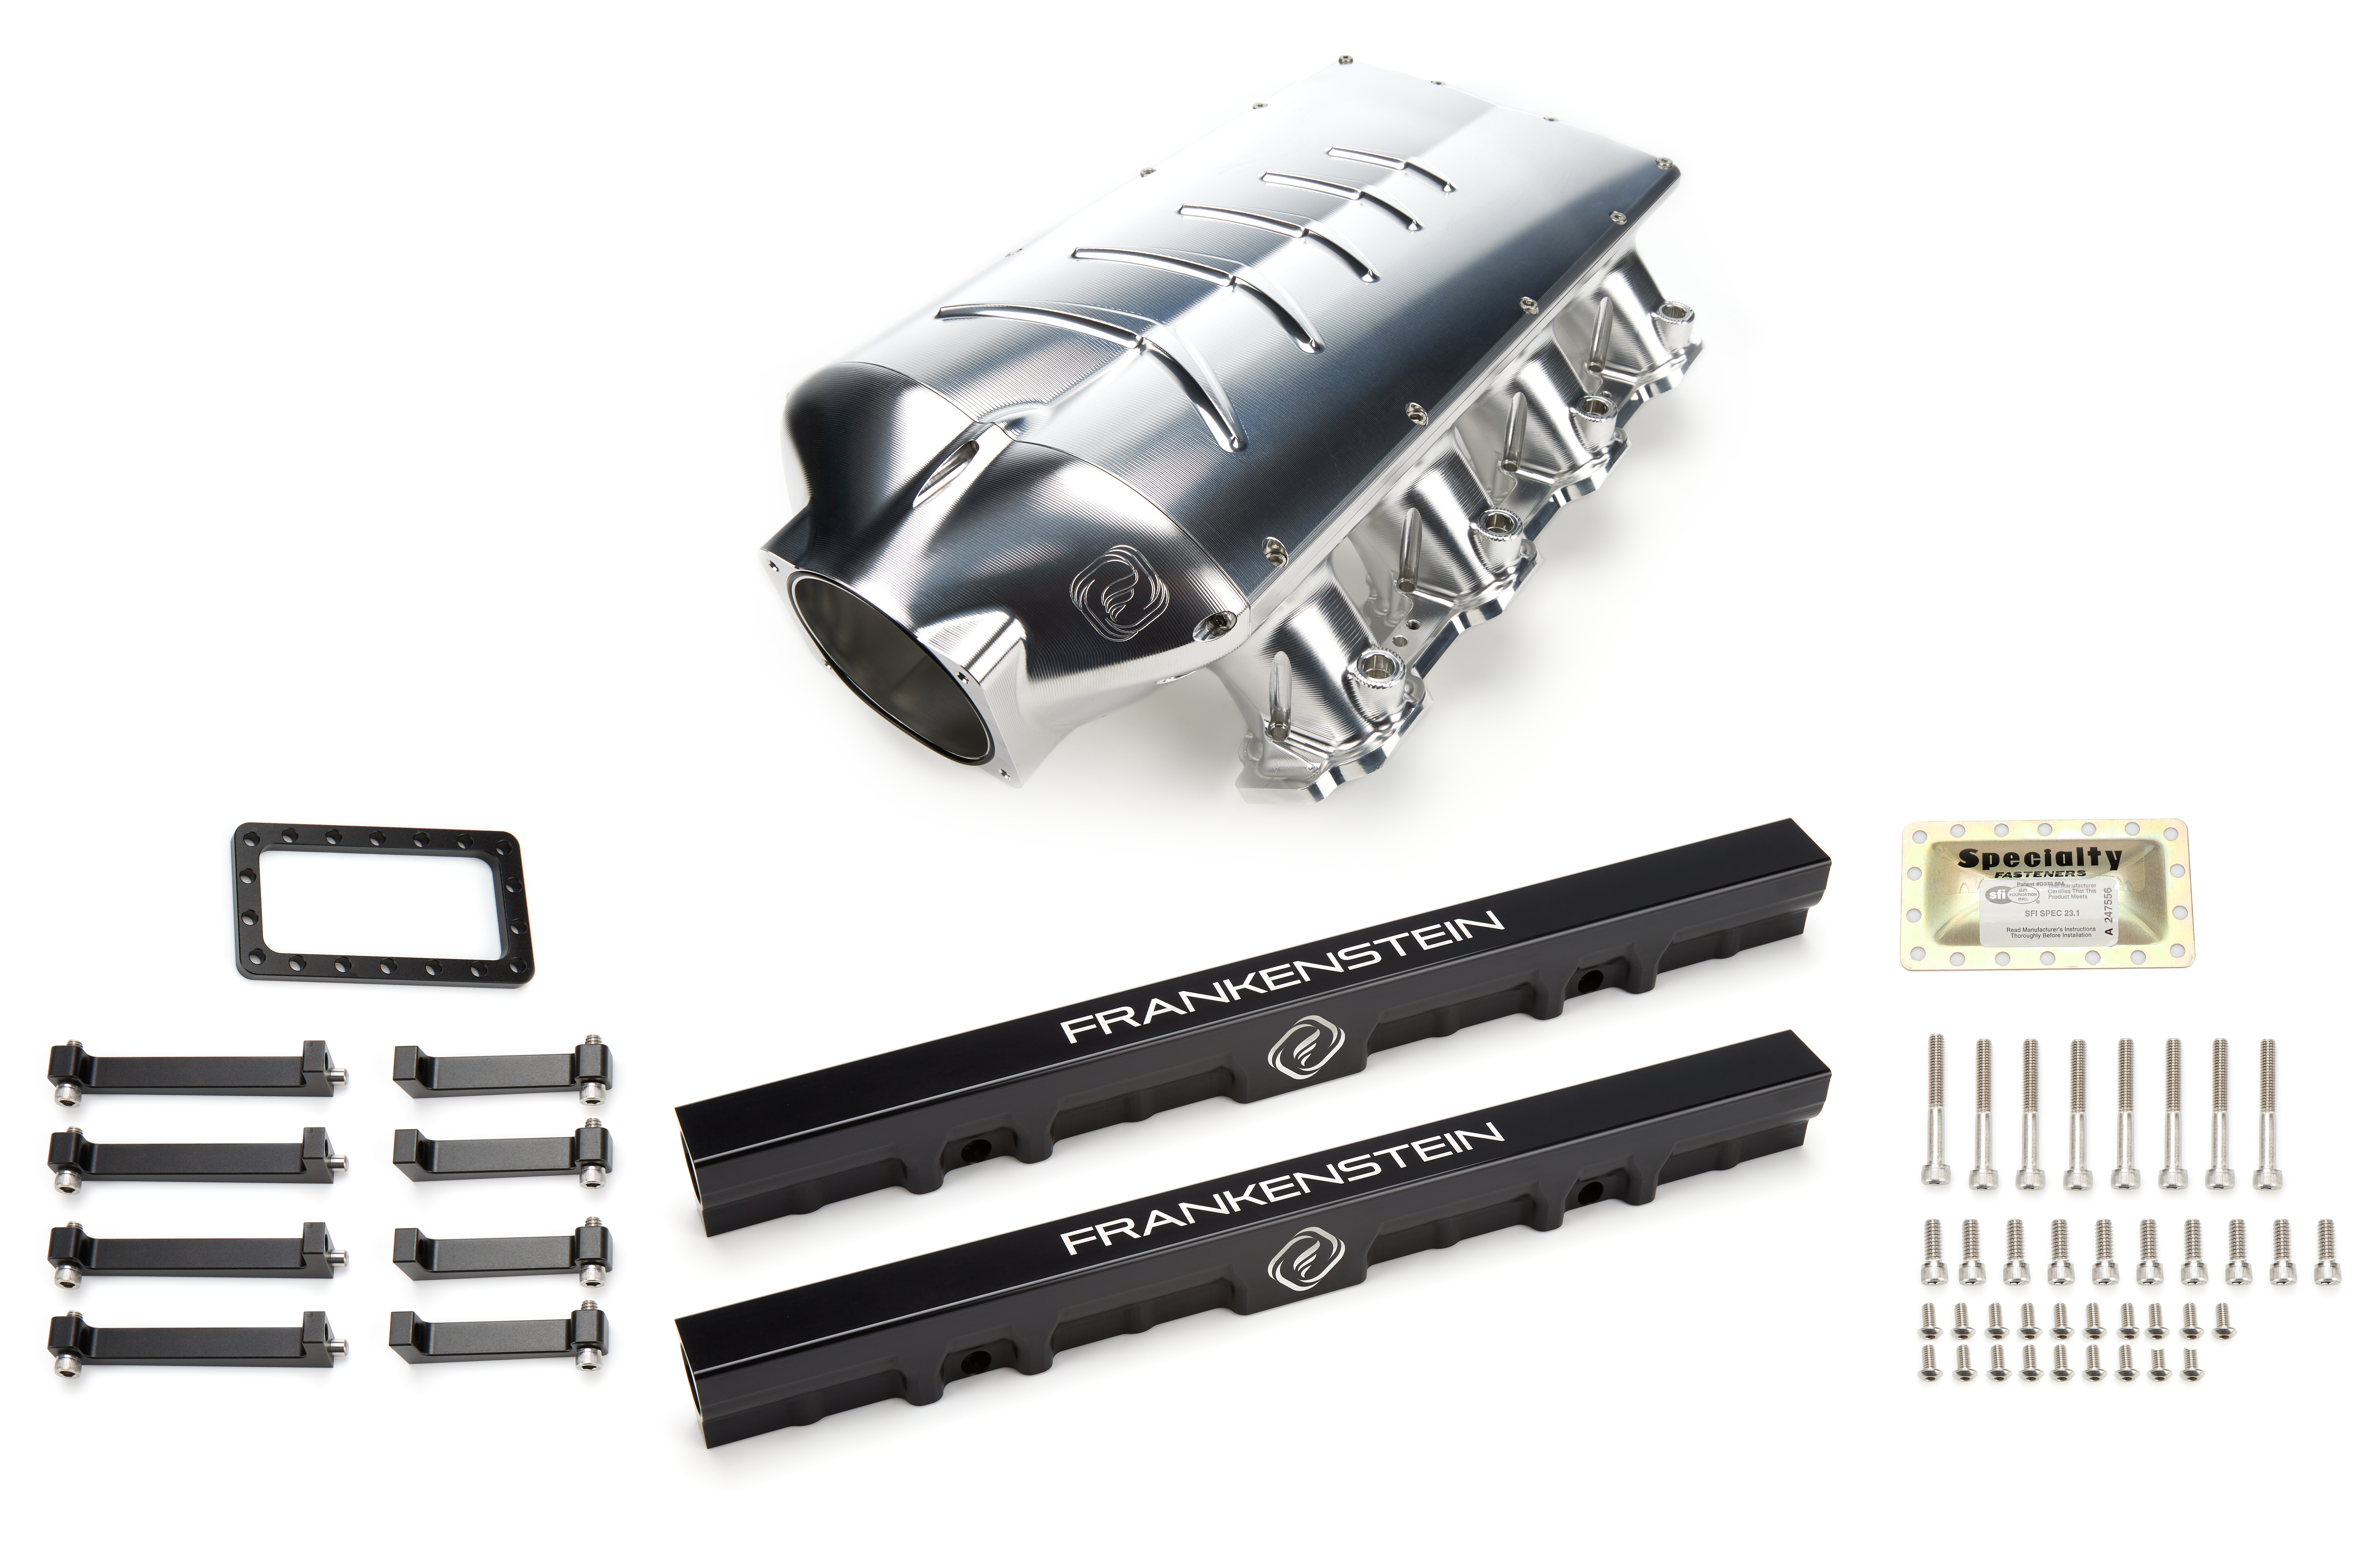 Frankenstein Engine 212225 Intake Manifold, LowPro, Fuel Rails Included, Aluminum, Machined, LS3, GM LS-Series, Kit